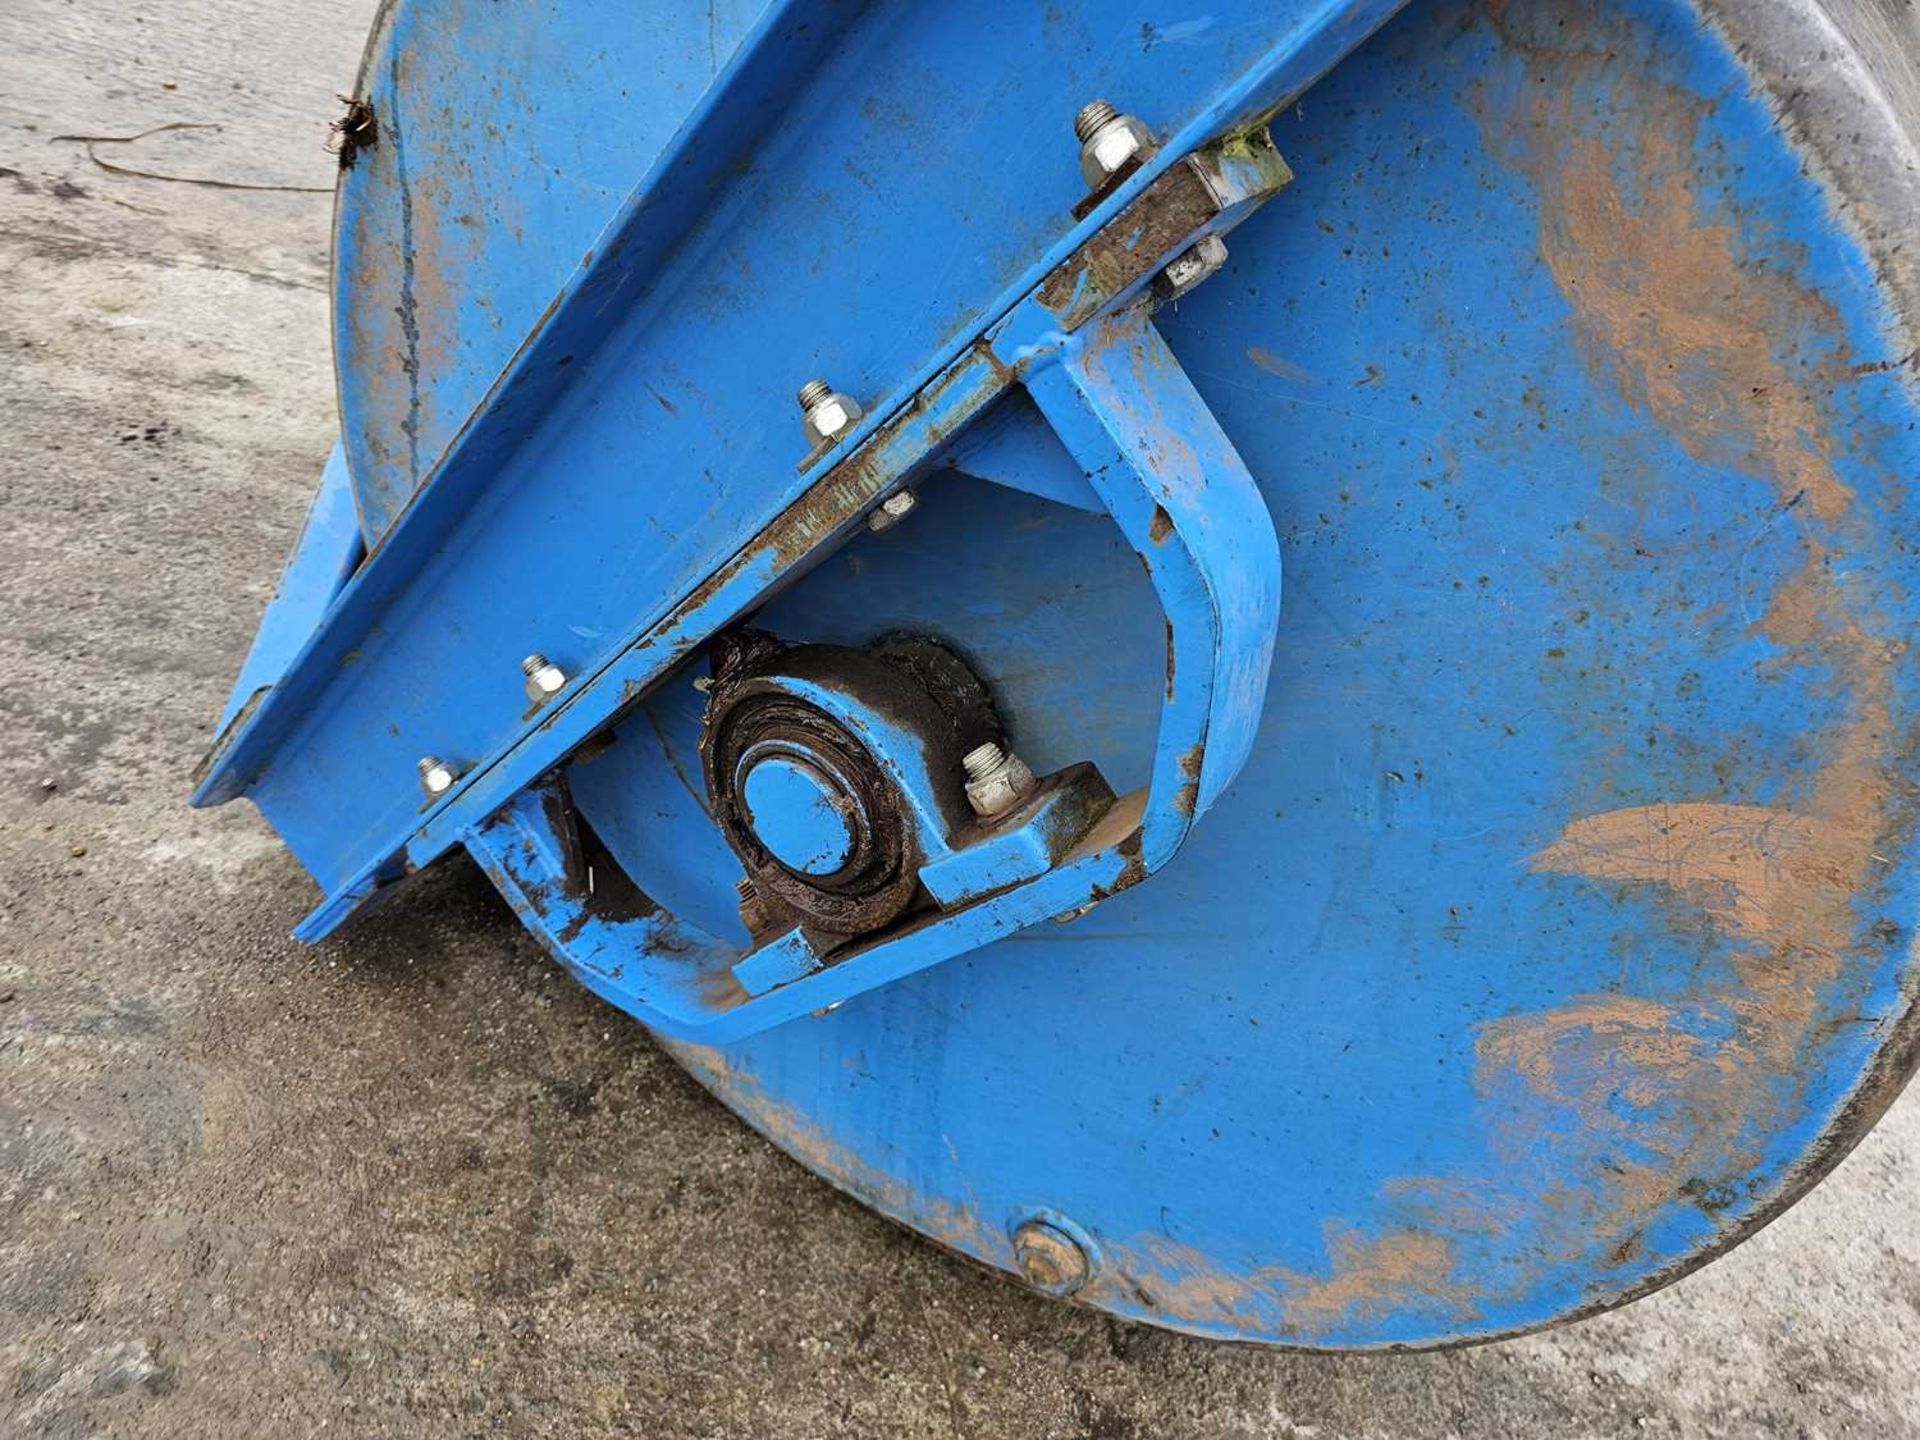 2016 Expom 1200Kg Roller to suit 3 Point Linkage - Image 8 of 9